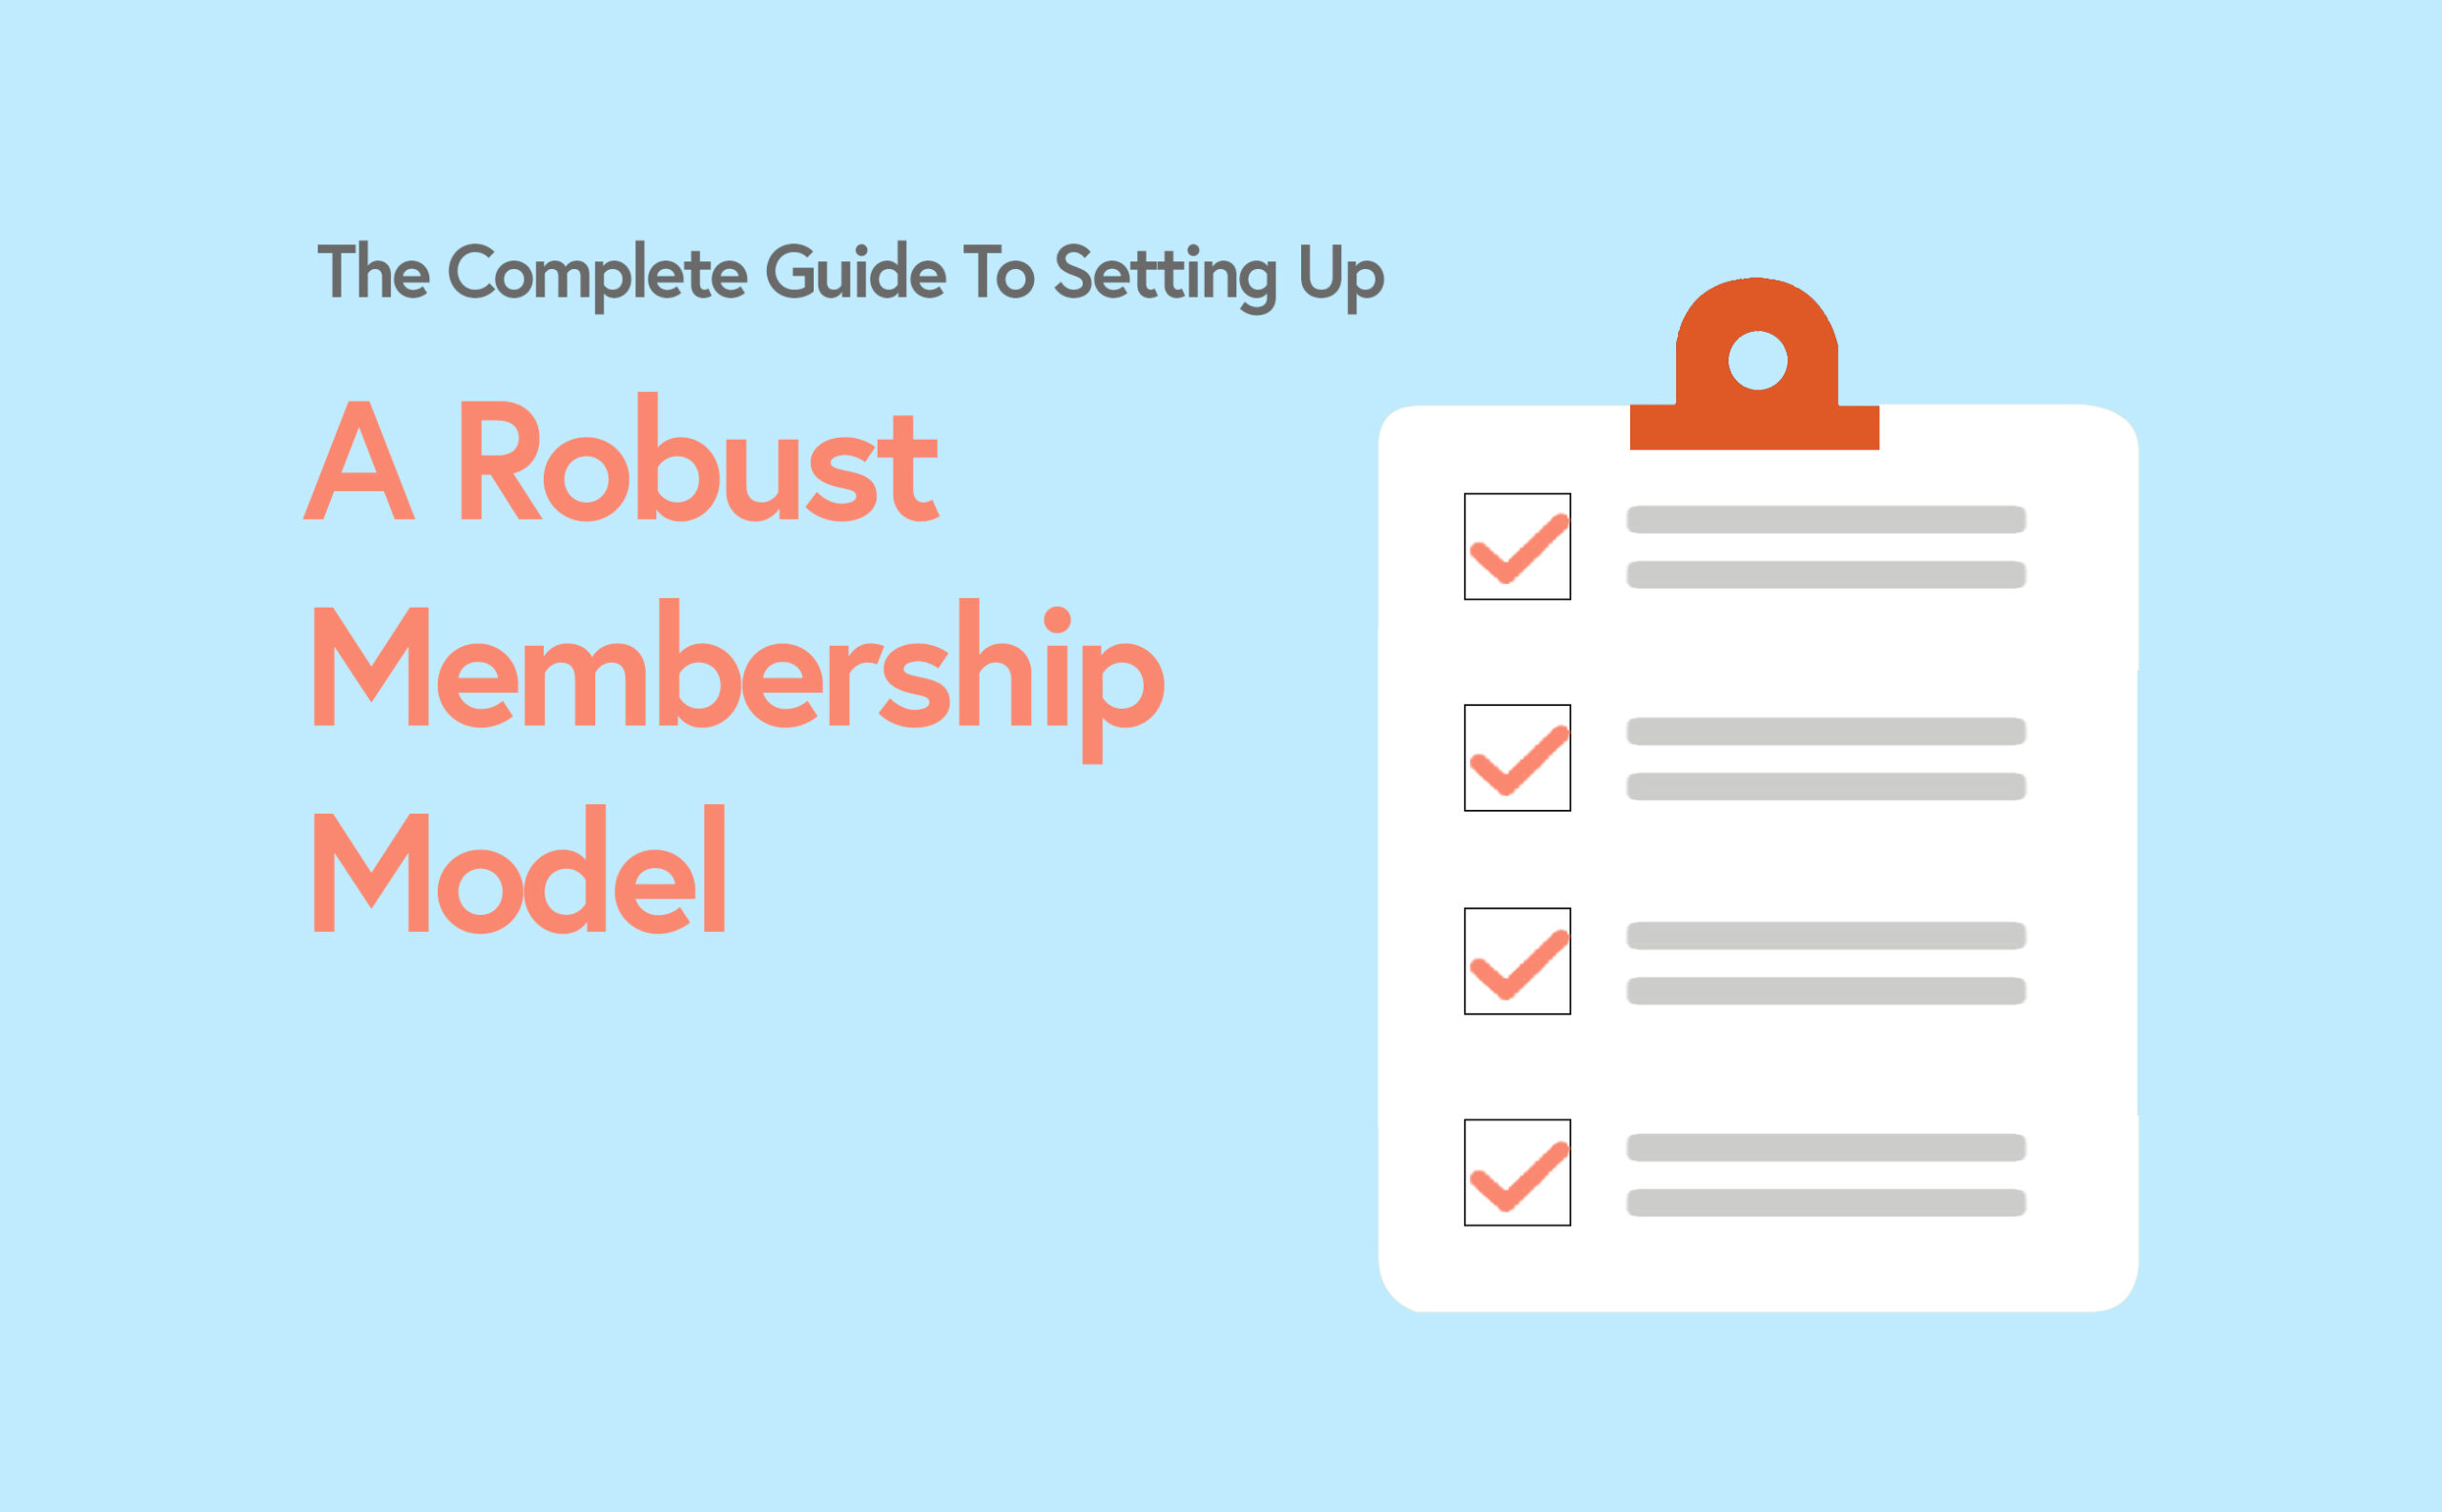 The Complete Guide to Setting Up a Robust Membership Model